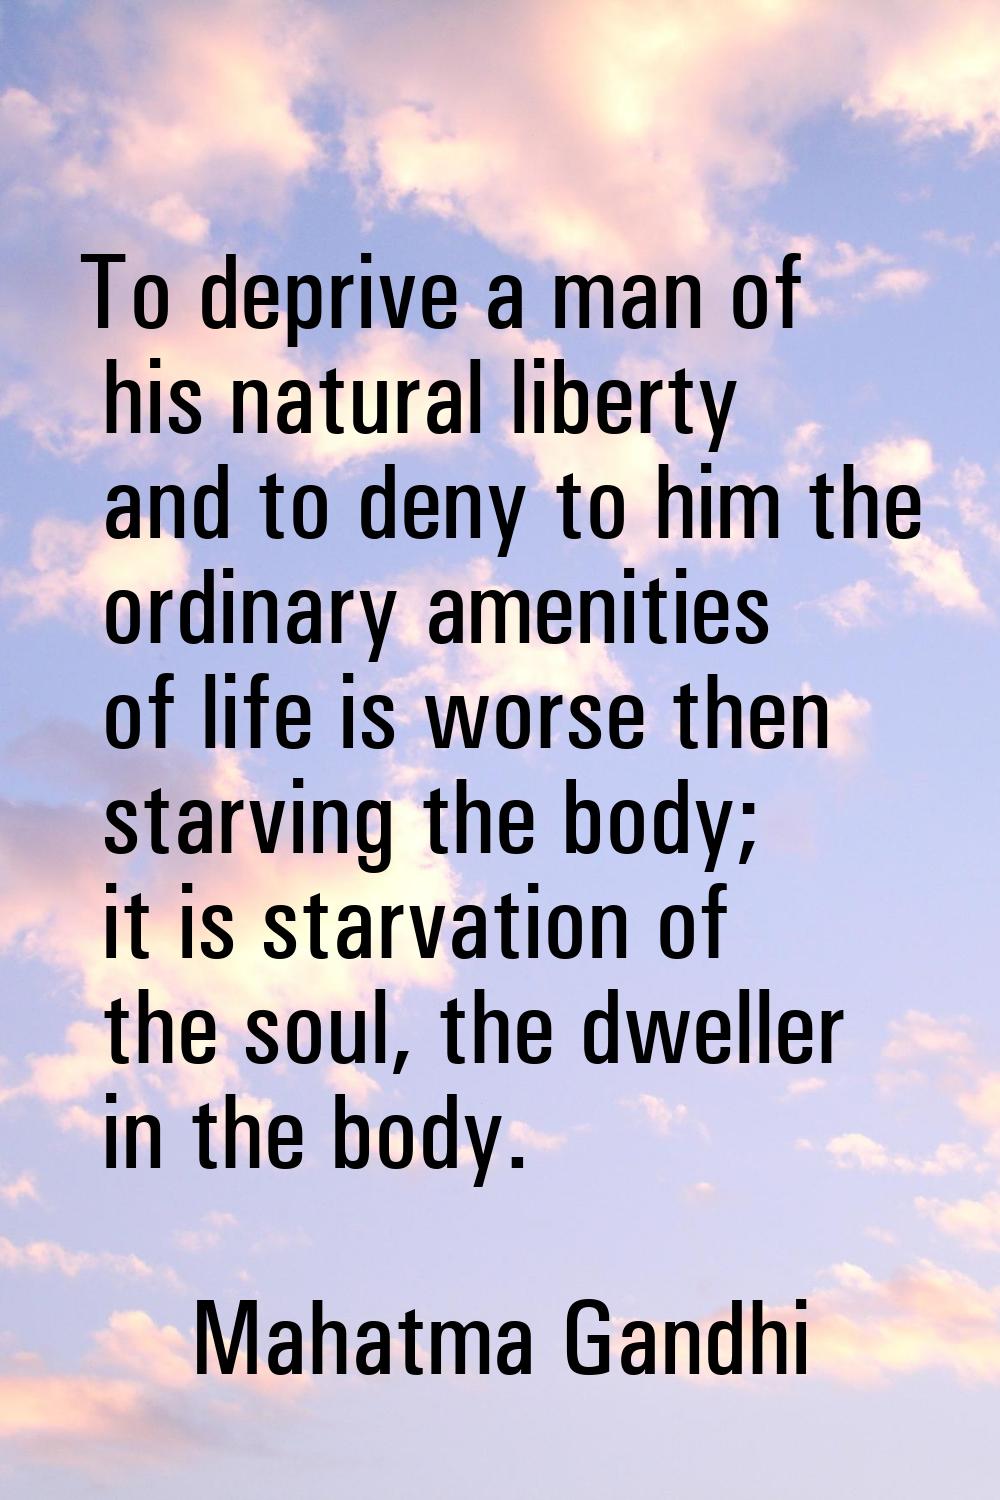 To deprive a man of his natural liberty and to deny to him the ordinary amenities of life is worse 